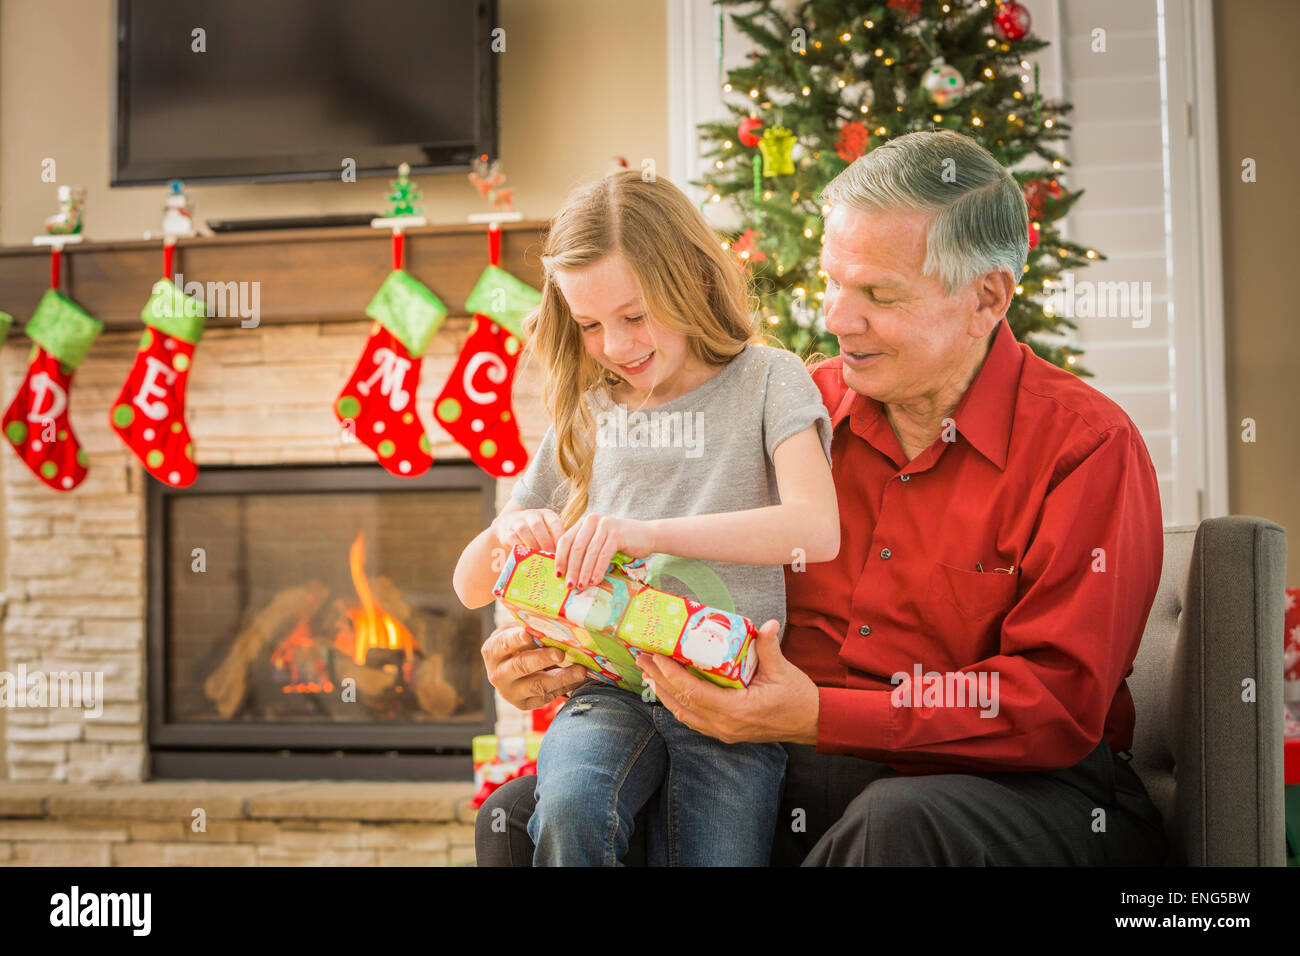 Caucasian grandfather opening Christmas gifts with granddaughter Stock Photo